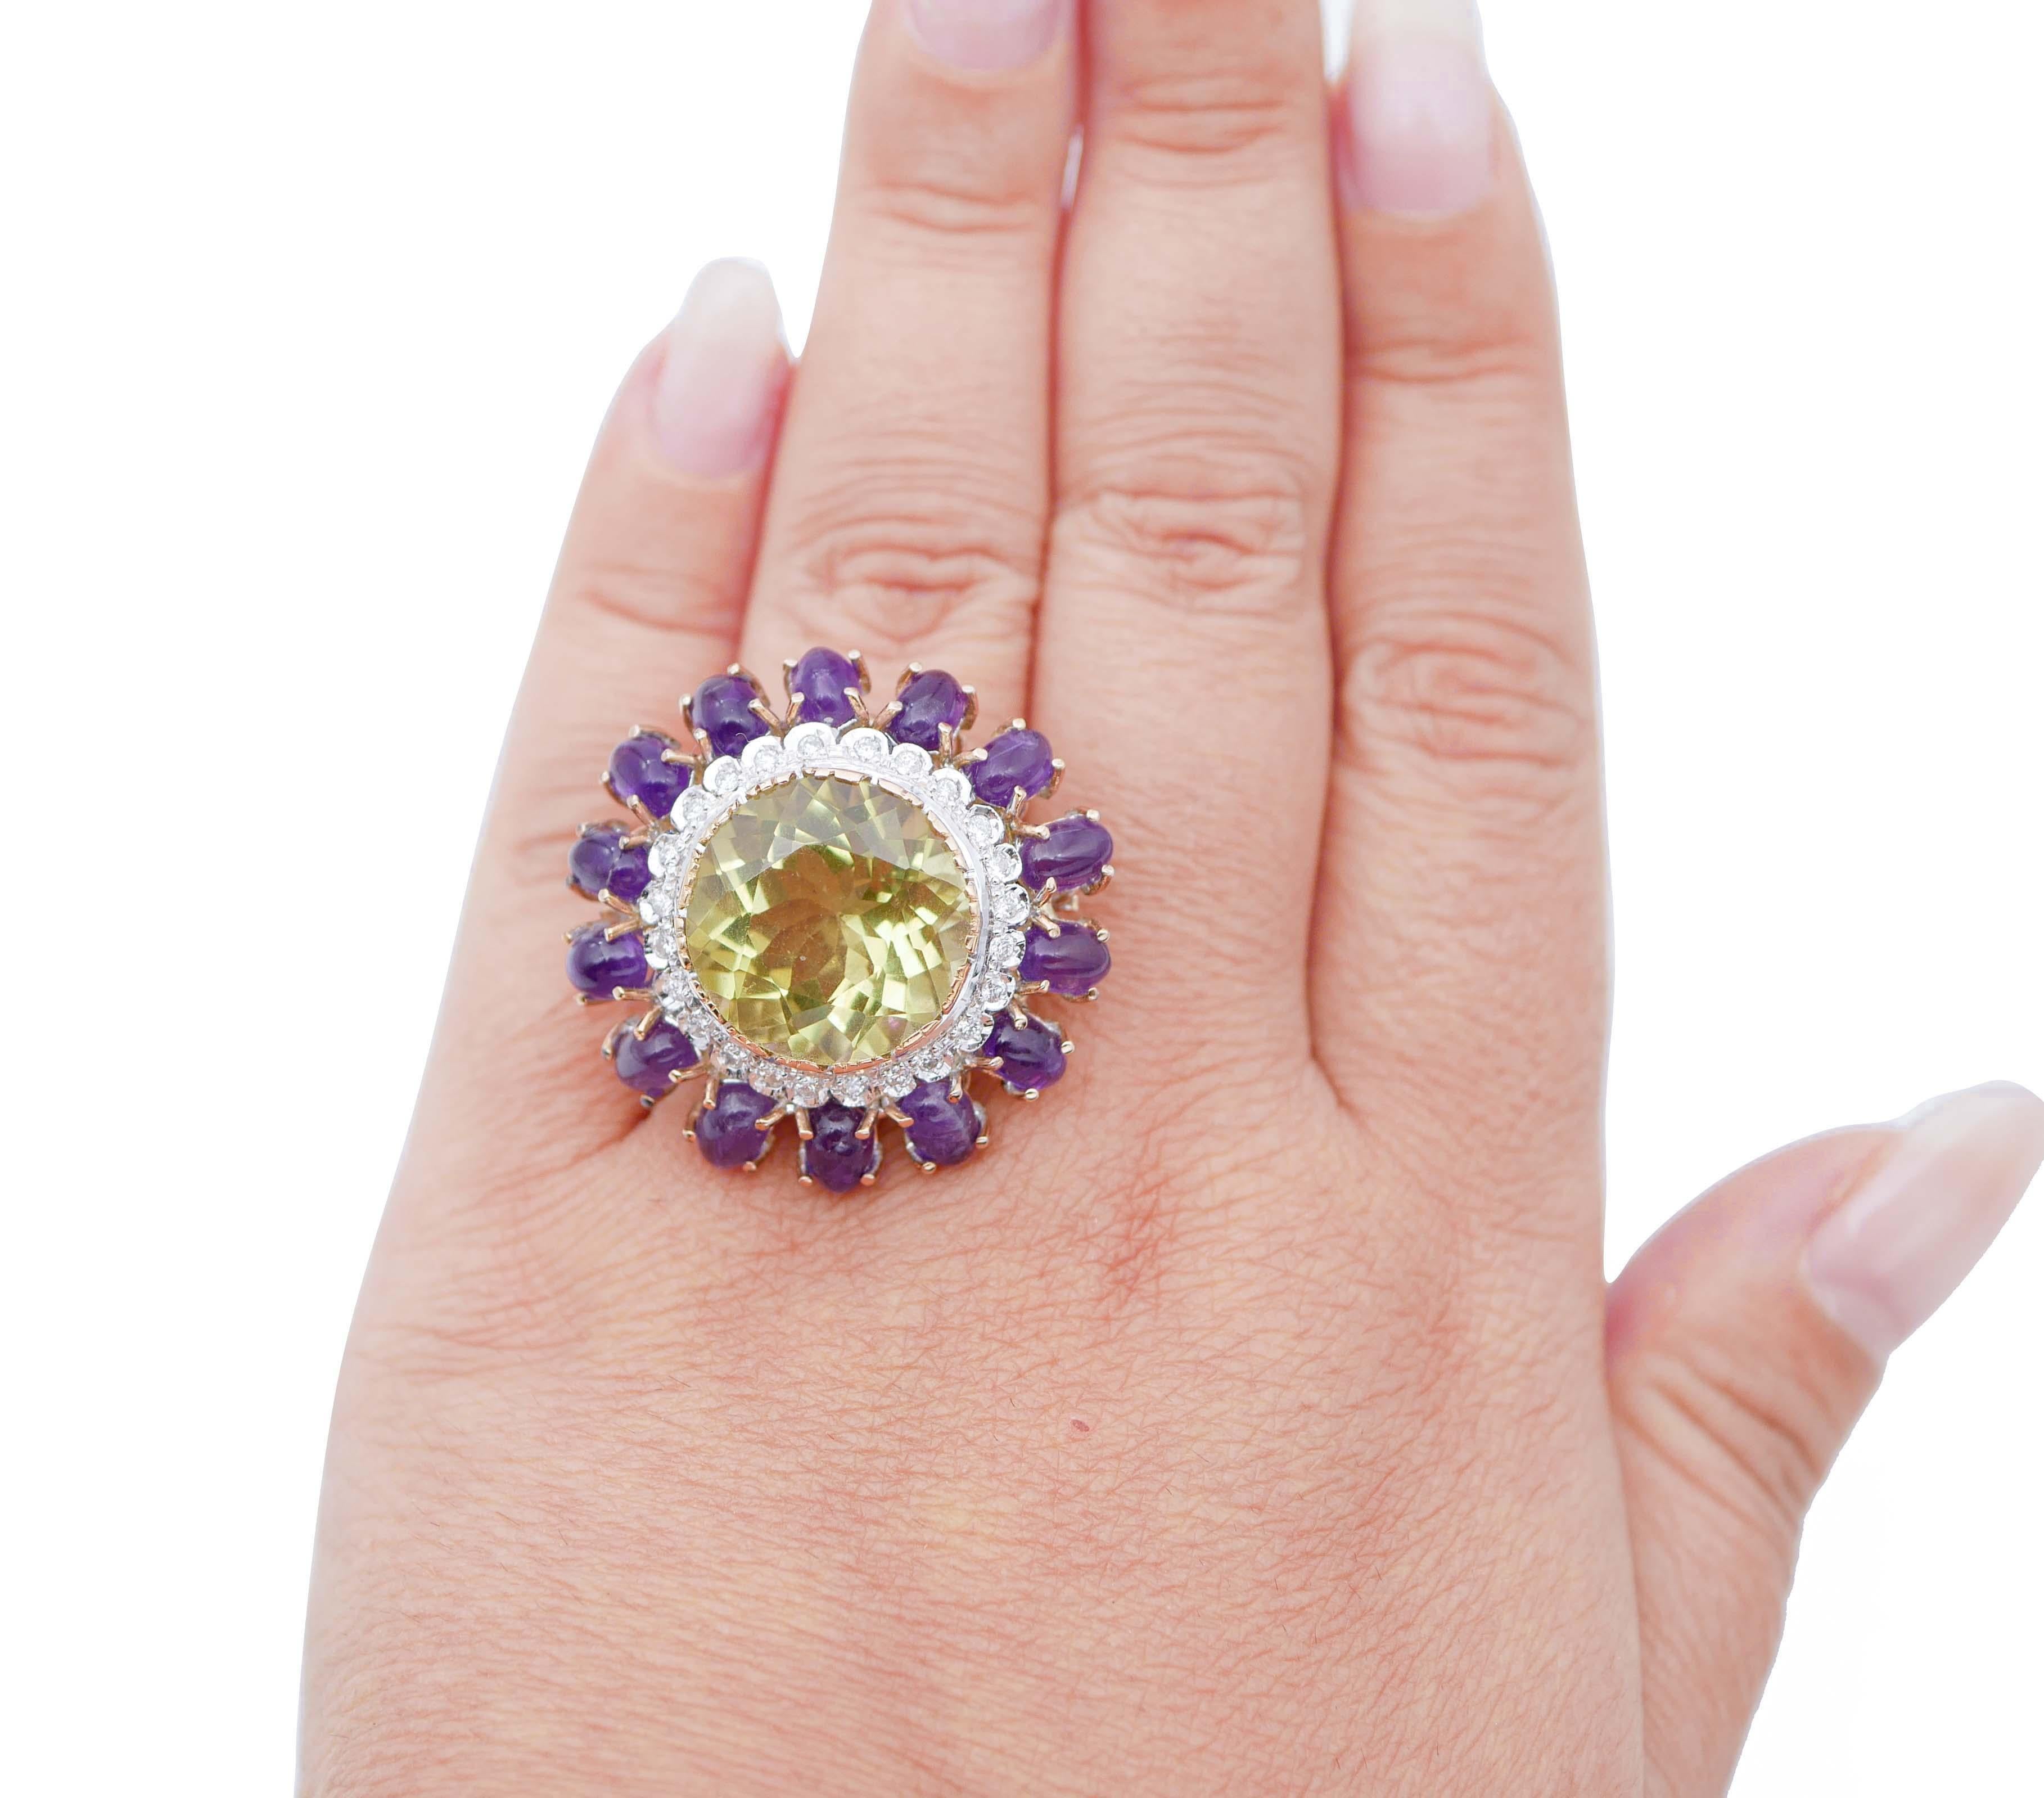 Mixed Cut Topaz, Amethysts, Diamonds, 14 Karat Rose and White Gold Ring For Sale